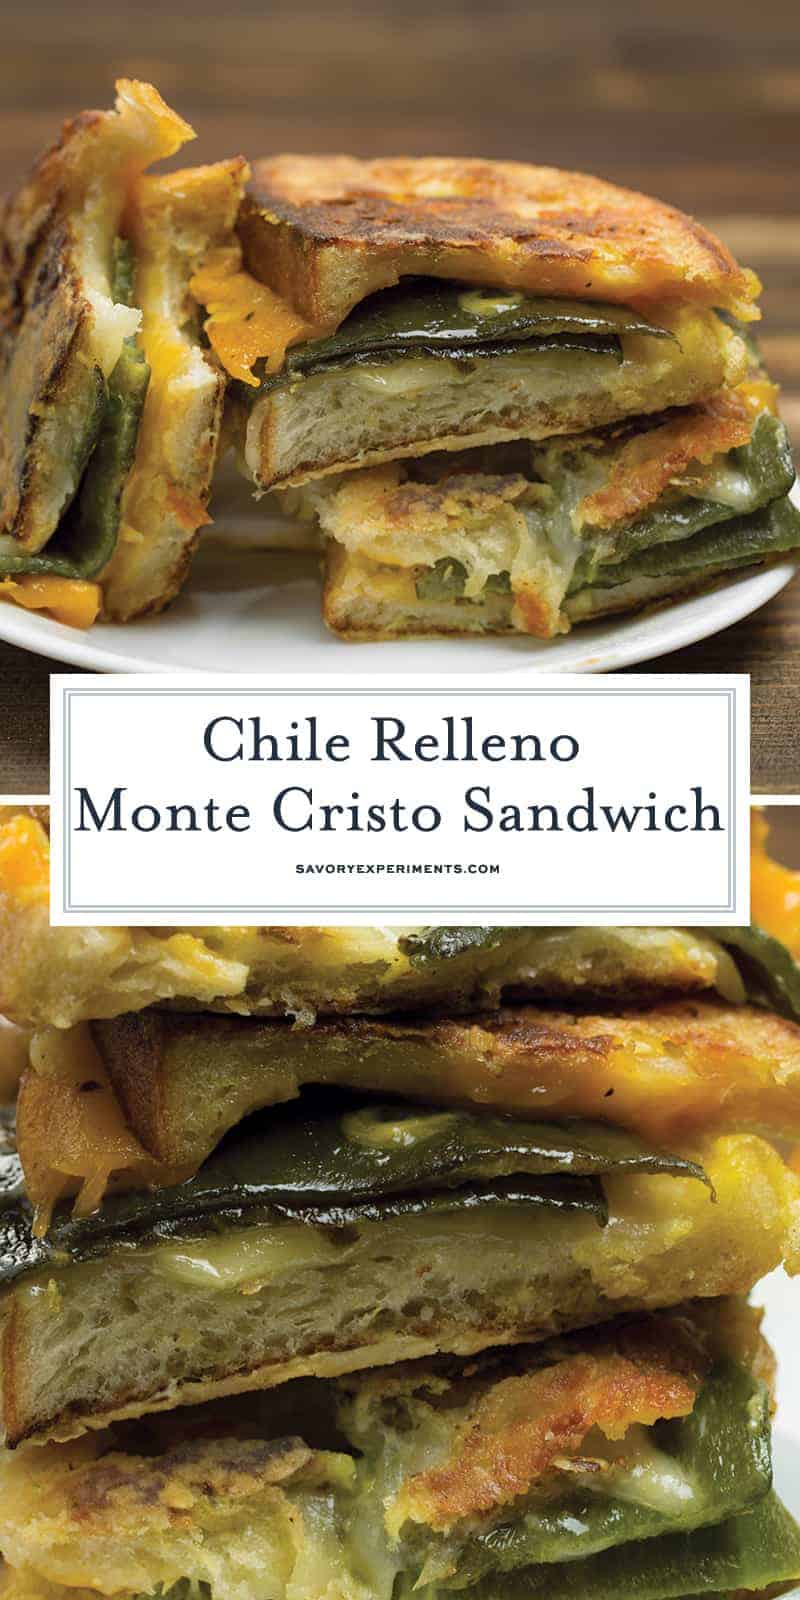 Chile Relleno Monte Cristo is a classic grilled cheese with pepper jack, cheddar and green chile and then battered and fried  Monte Cristo style. #montecristo #chilerelleno www.savoryexperiments.com 